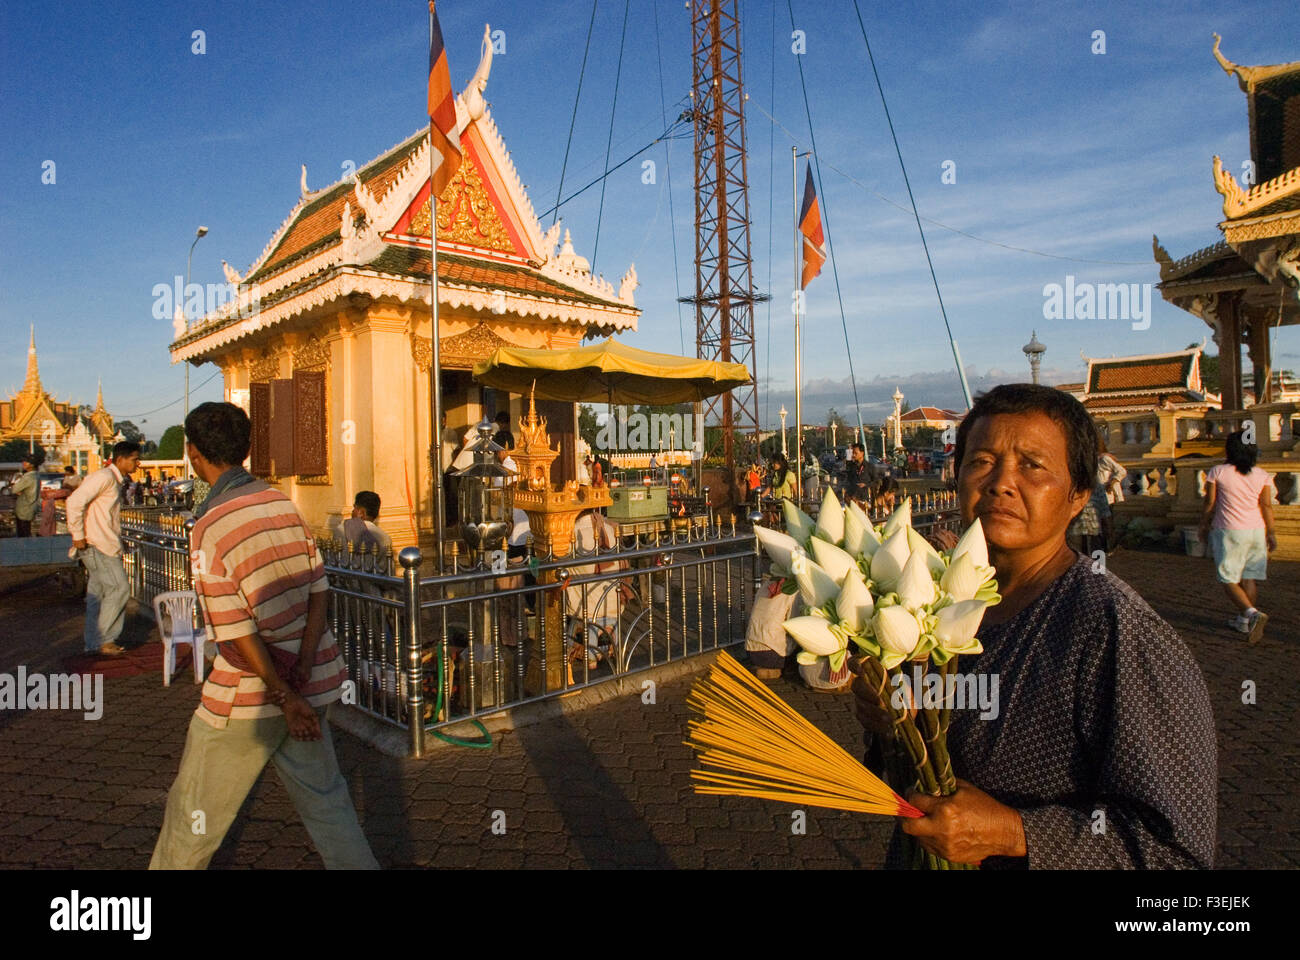 Flower seller near Tonle Sap River. Phnom Penh.  A mixture of Cambodian hospitality, Asian exotica and Indochinese charm await t Stock Photo